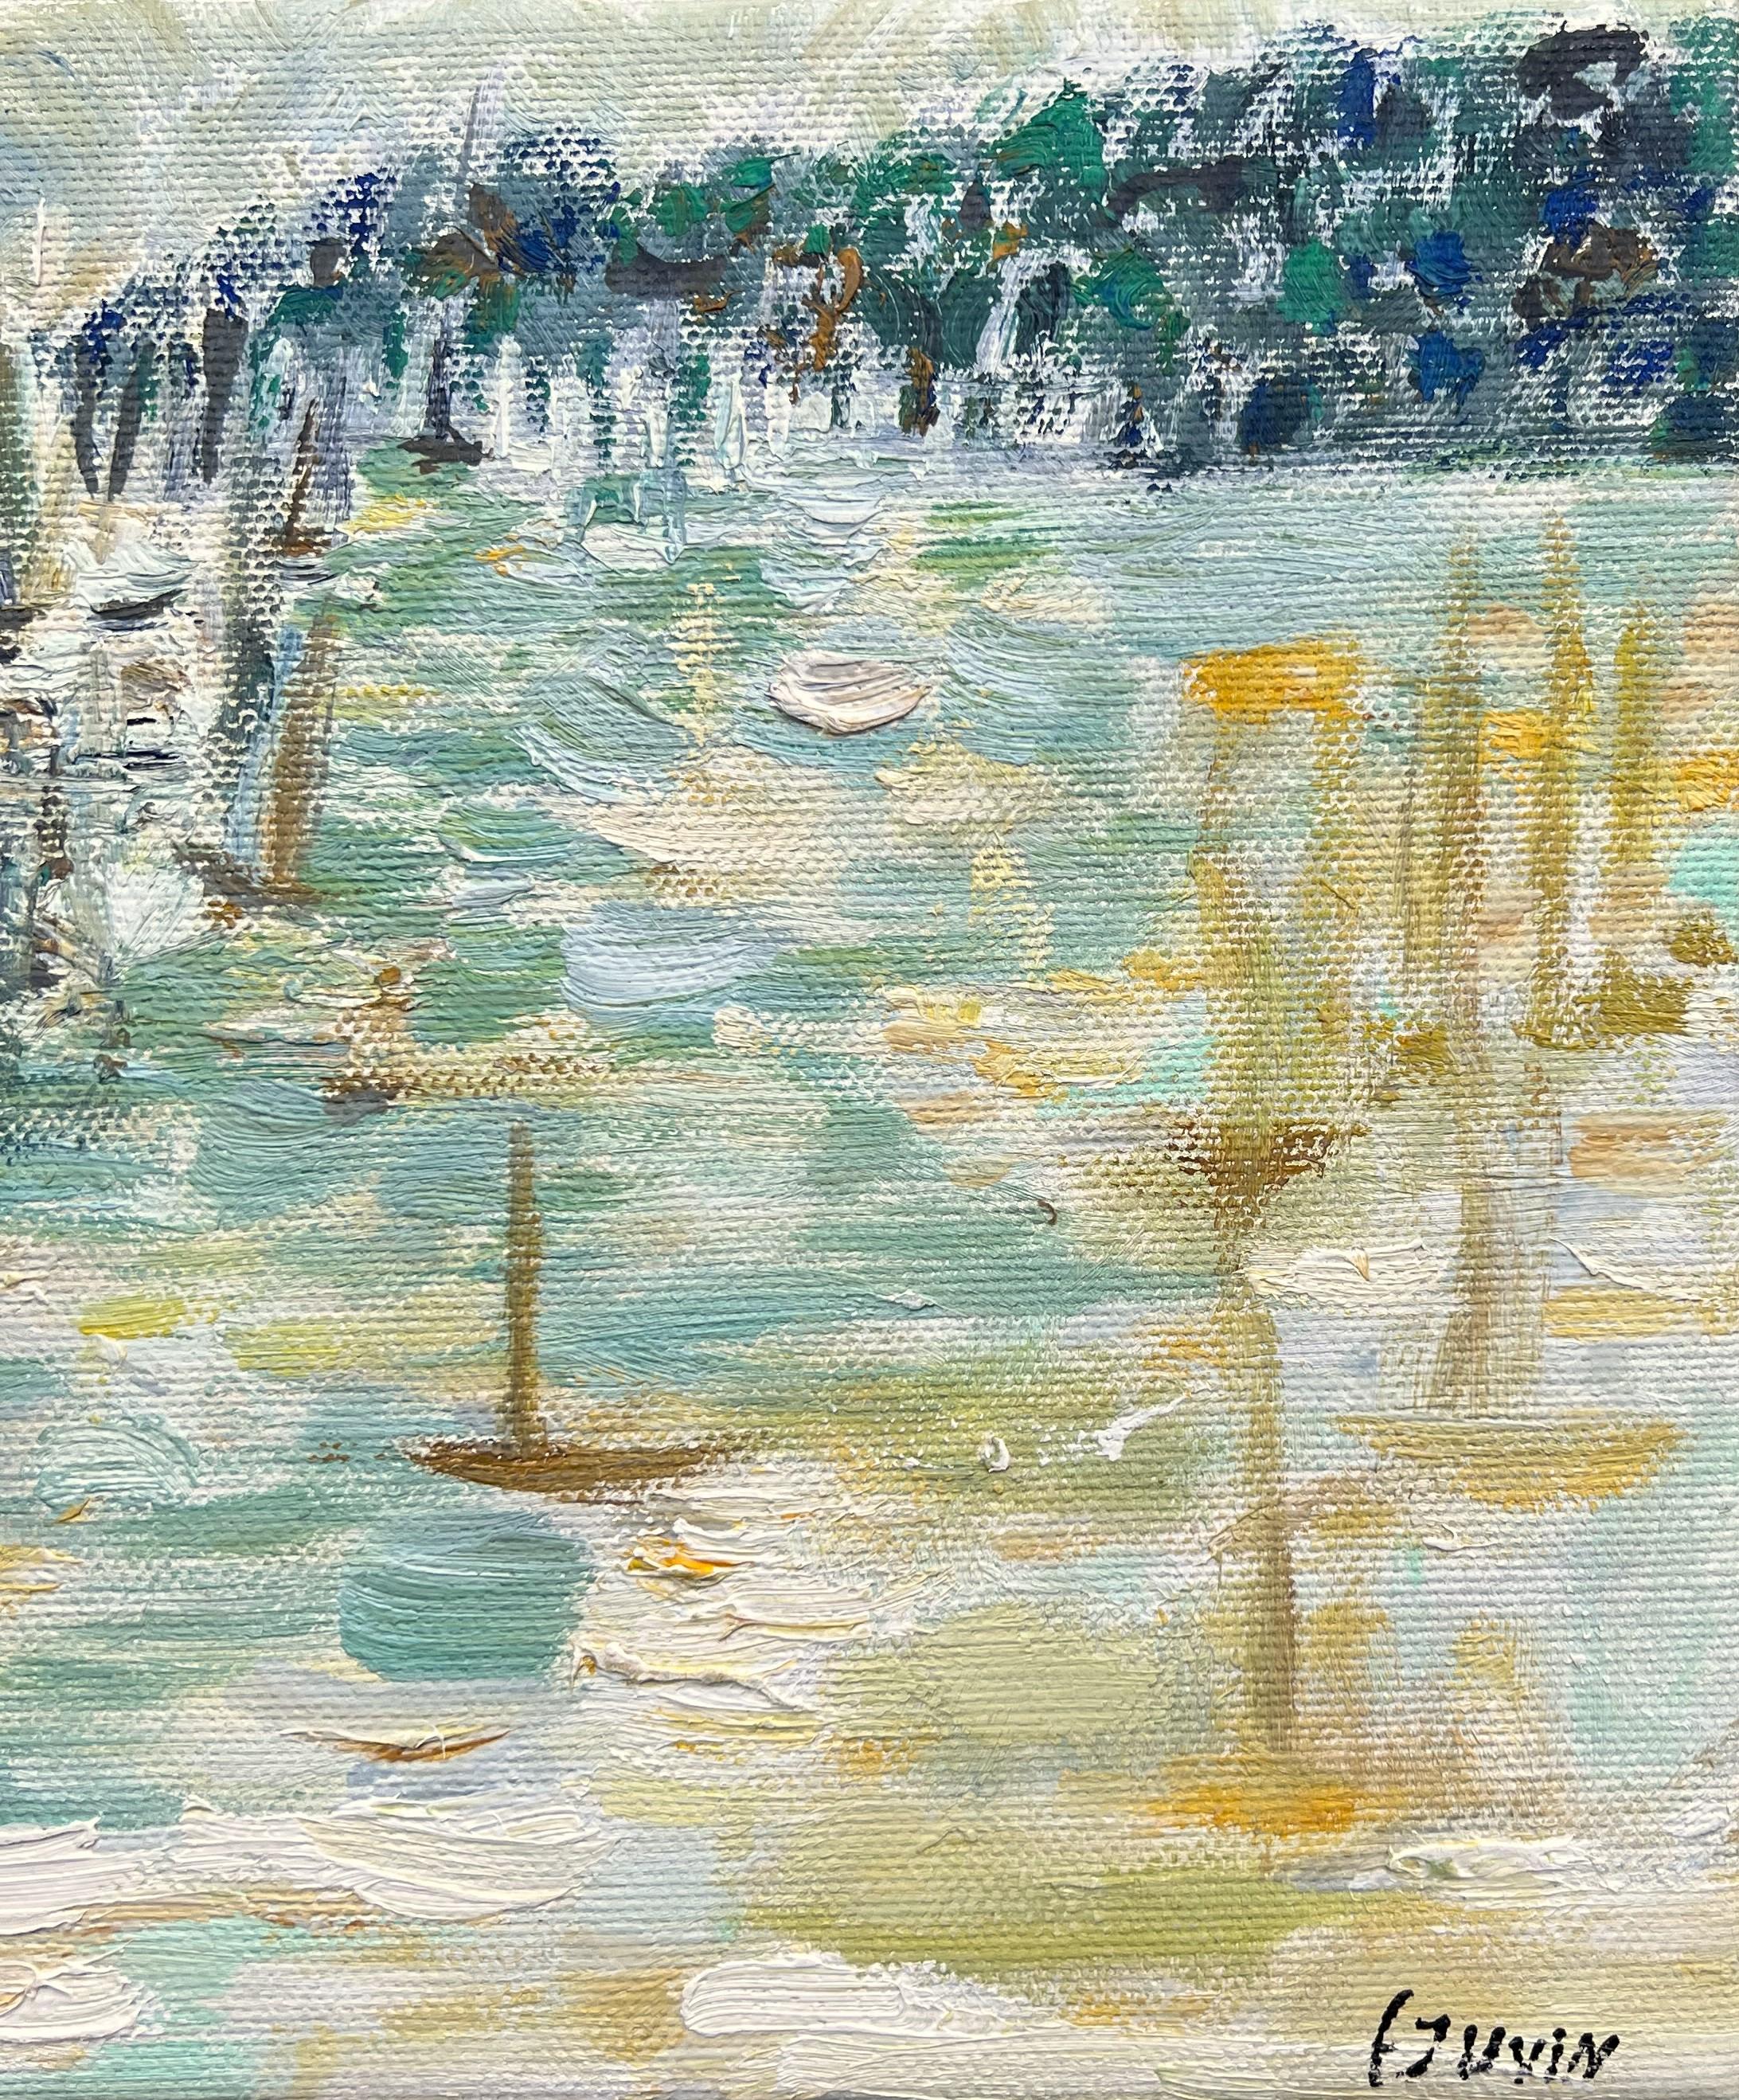 Boats in the bay of Cannes, Landscape, oil painting on canvas by Françoise Juvin For Sale 1